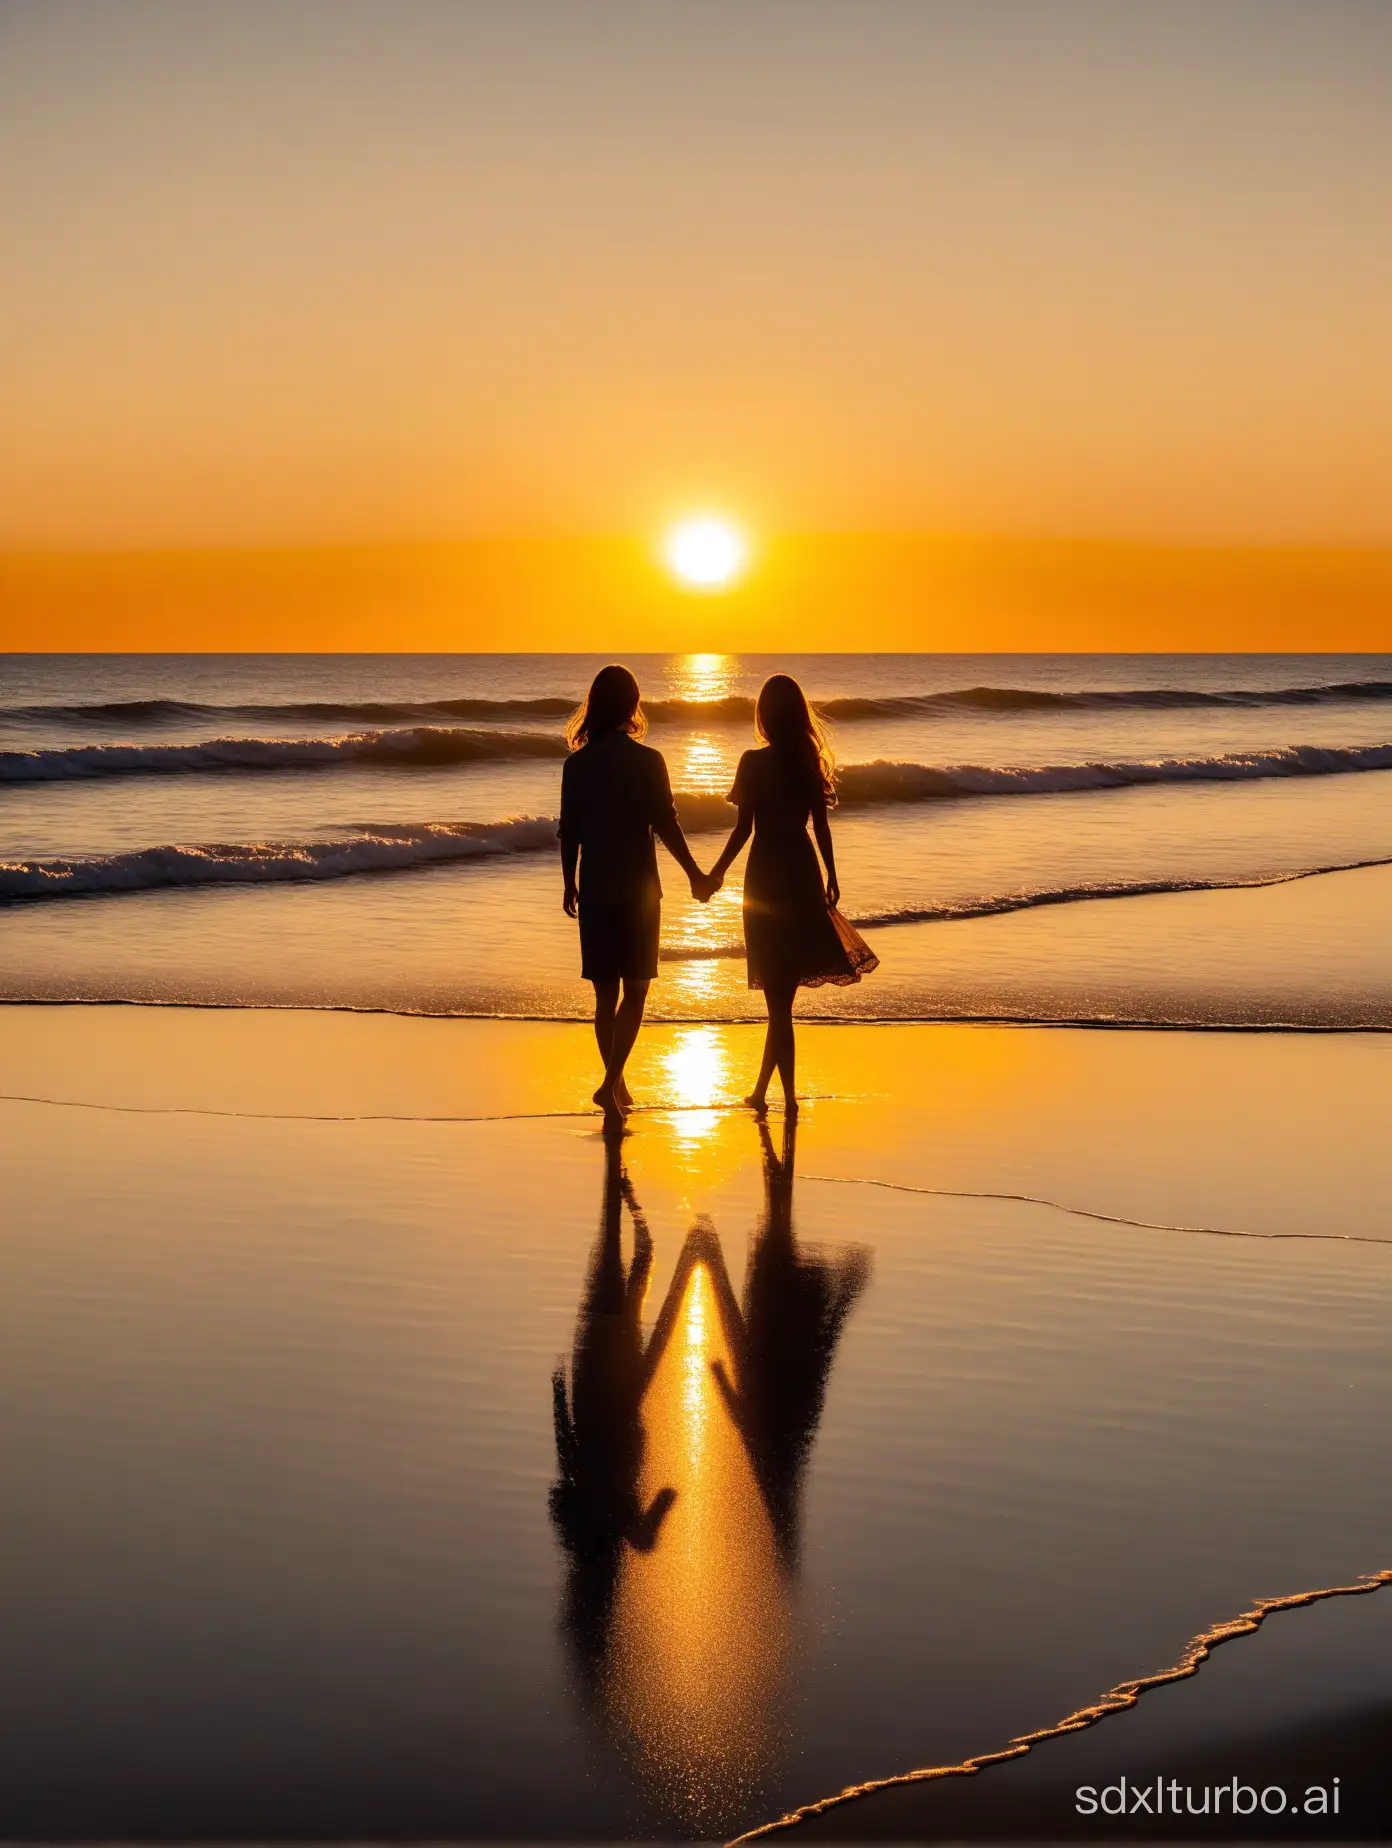 Tranquil-Sunset-Beach-Scene-with-Silhouetted-Figures-Holding-Hands